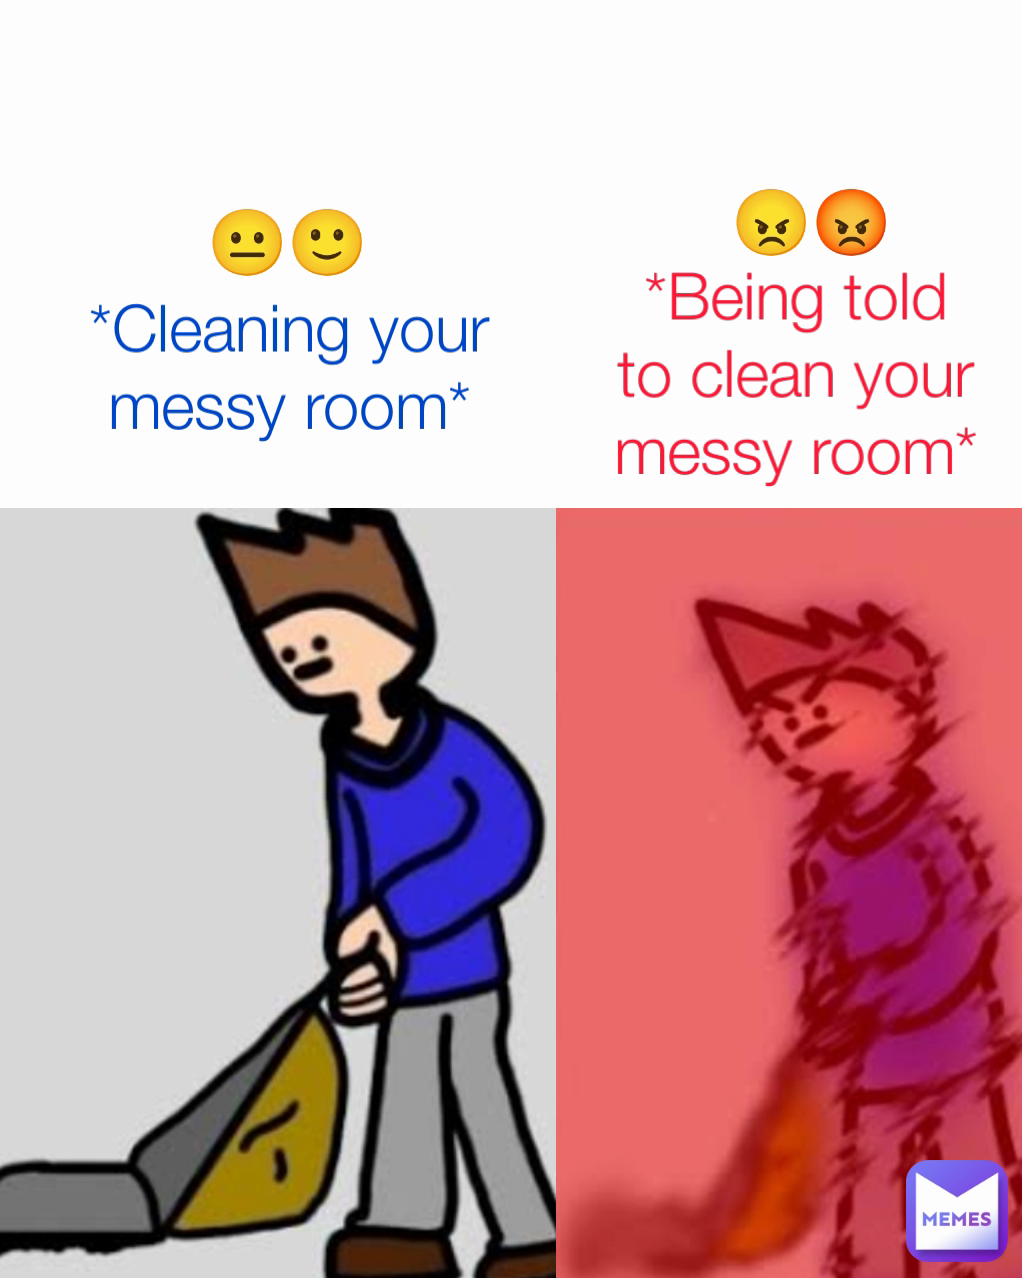 😠😡 😐🙂 *Being told to clean your messy room* *Cleaning your messy room*